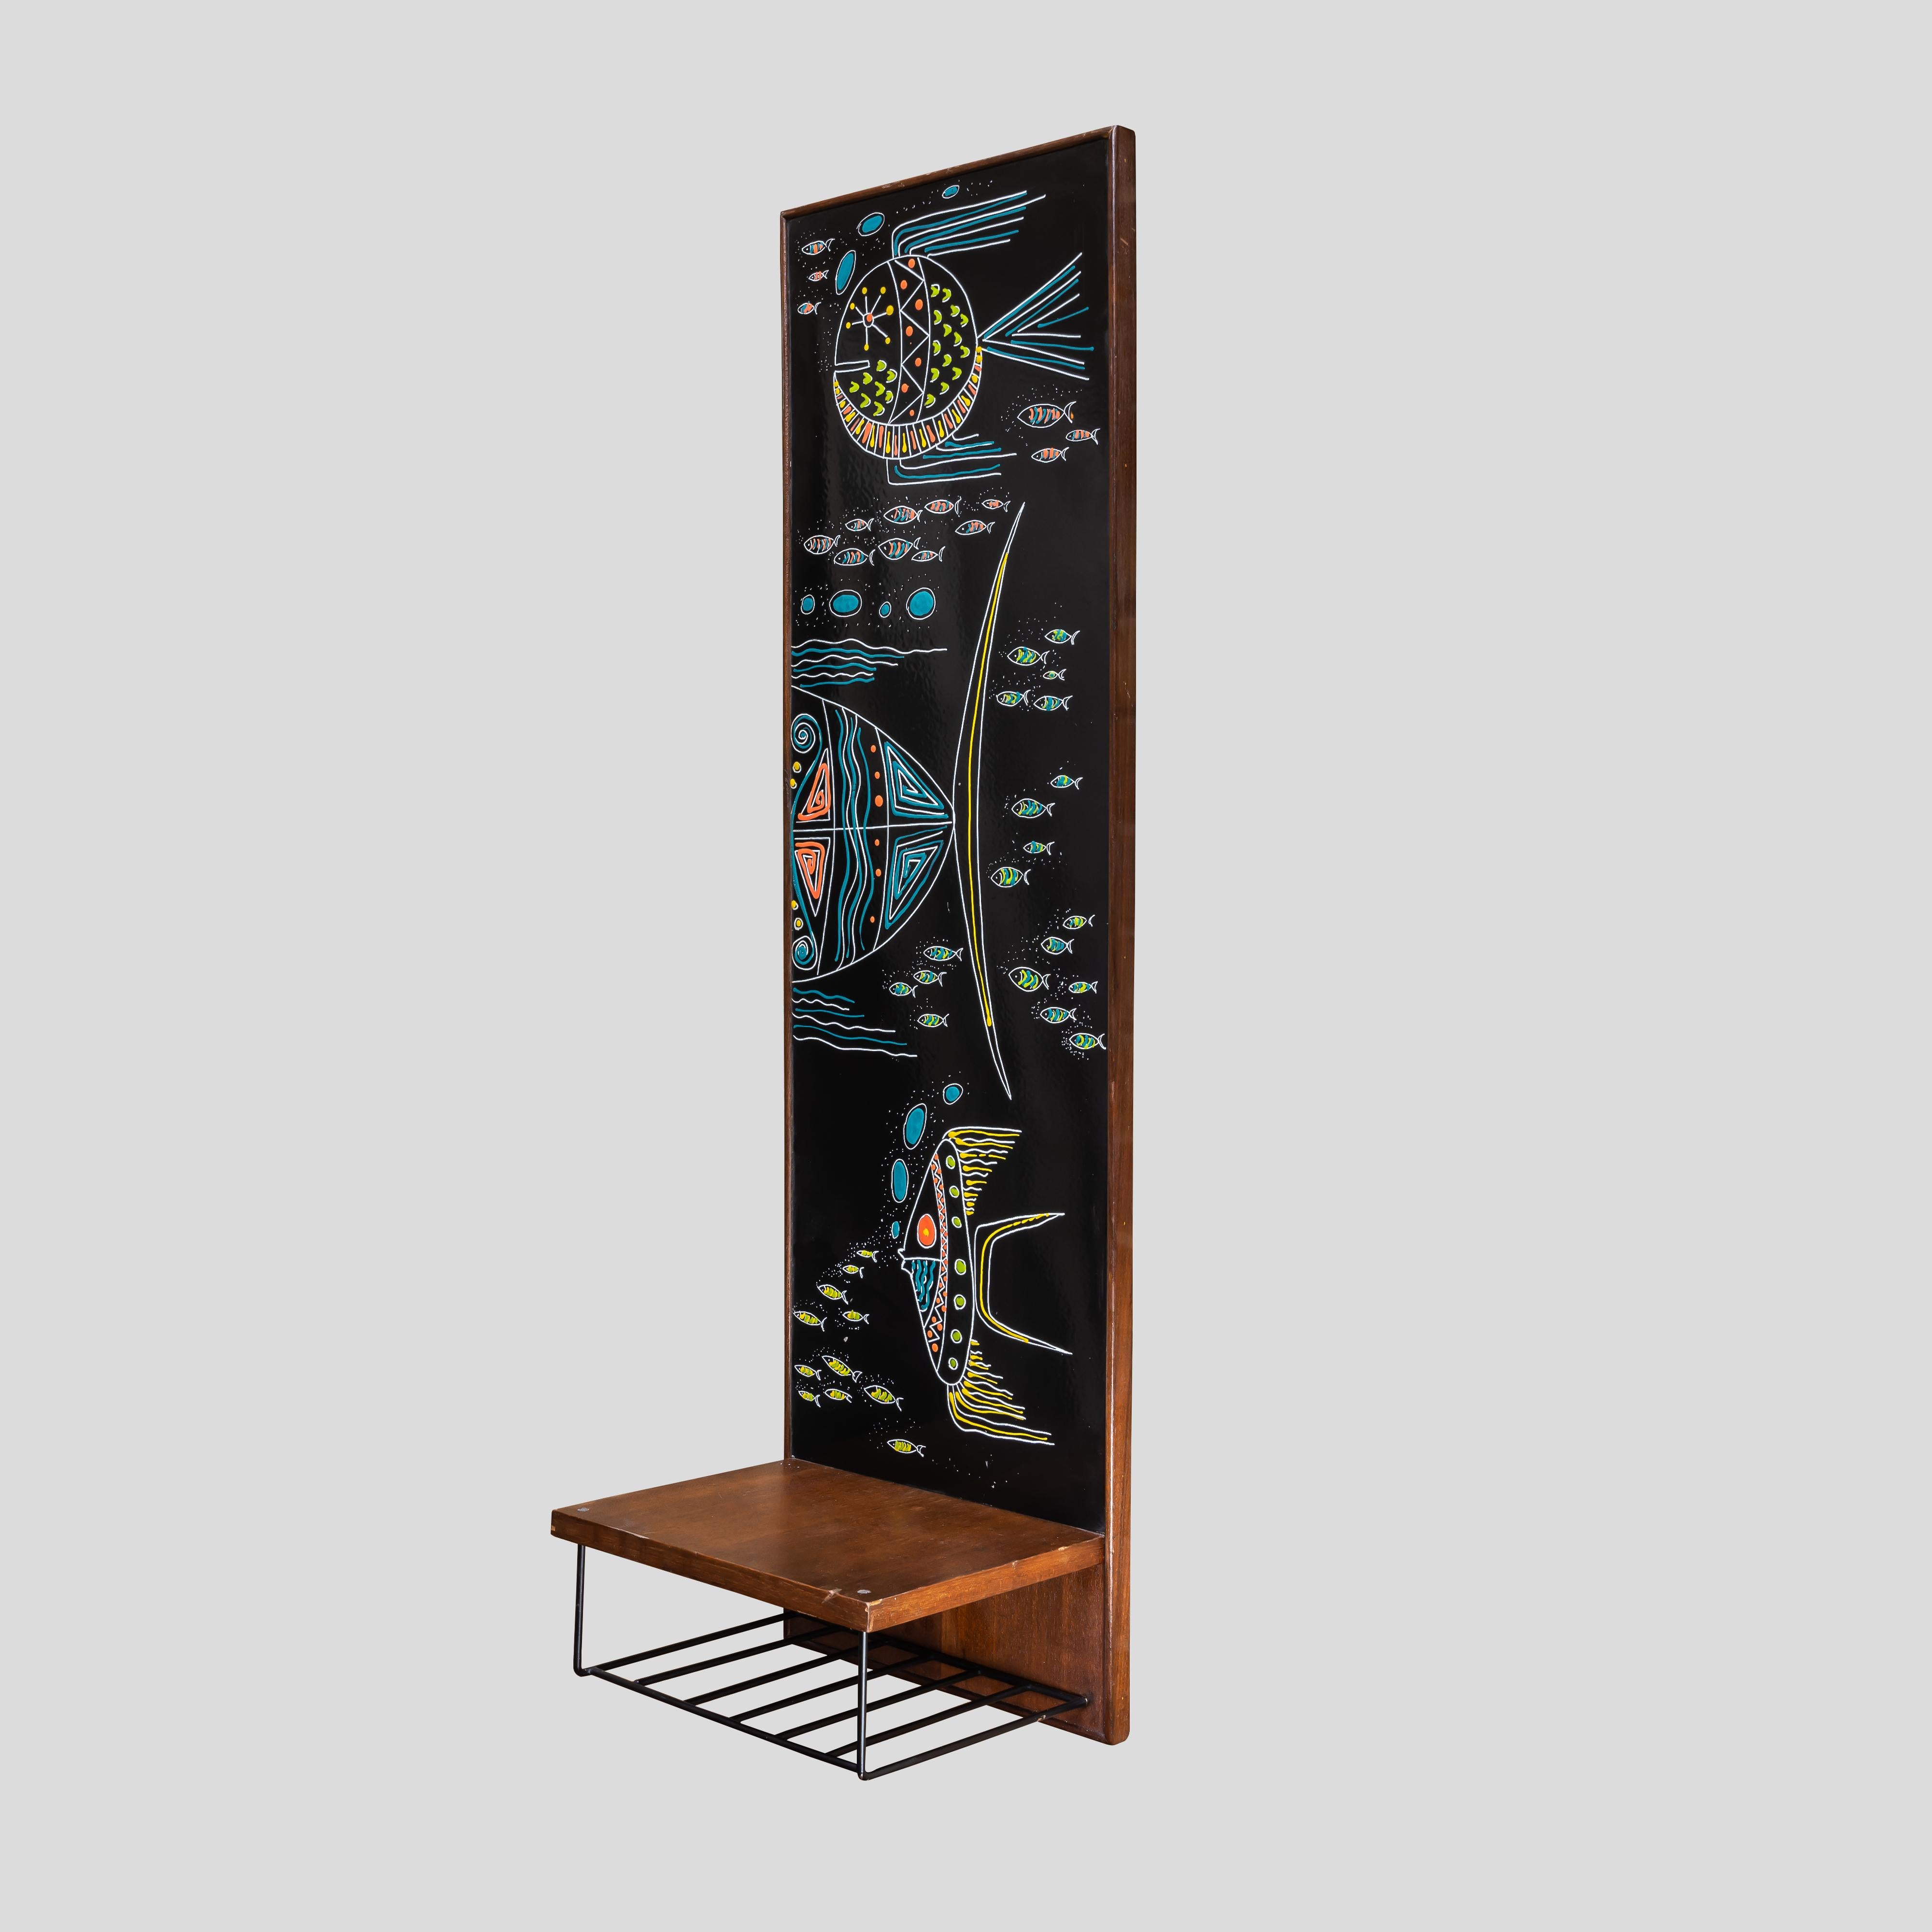 Italian Fish Enamelled Arts on Metal Console Design by Siva Poggibonsi, 1950s For Sale